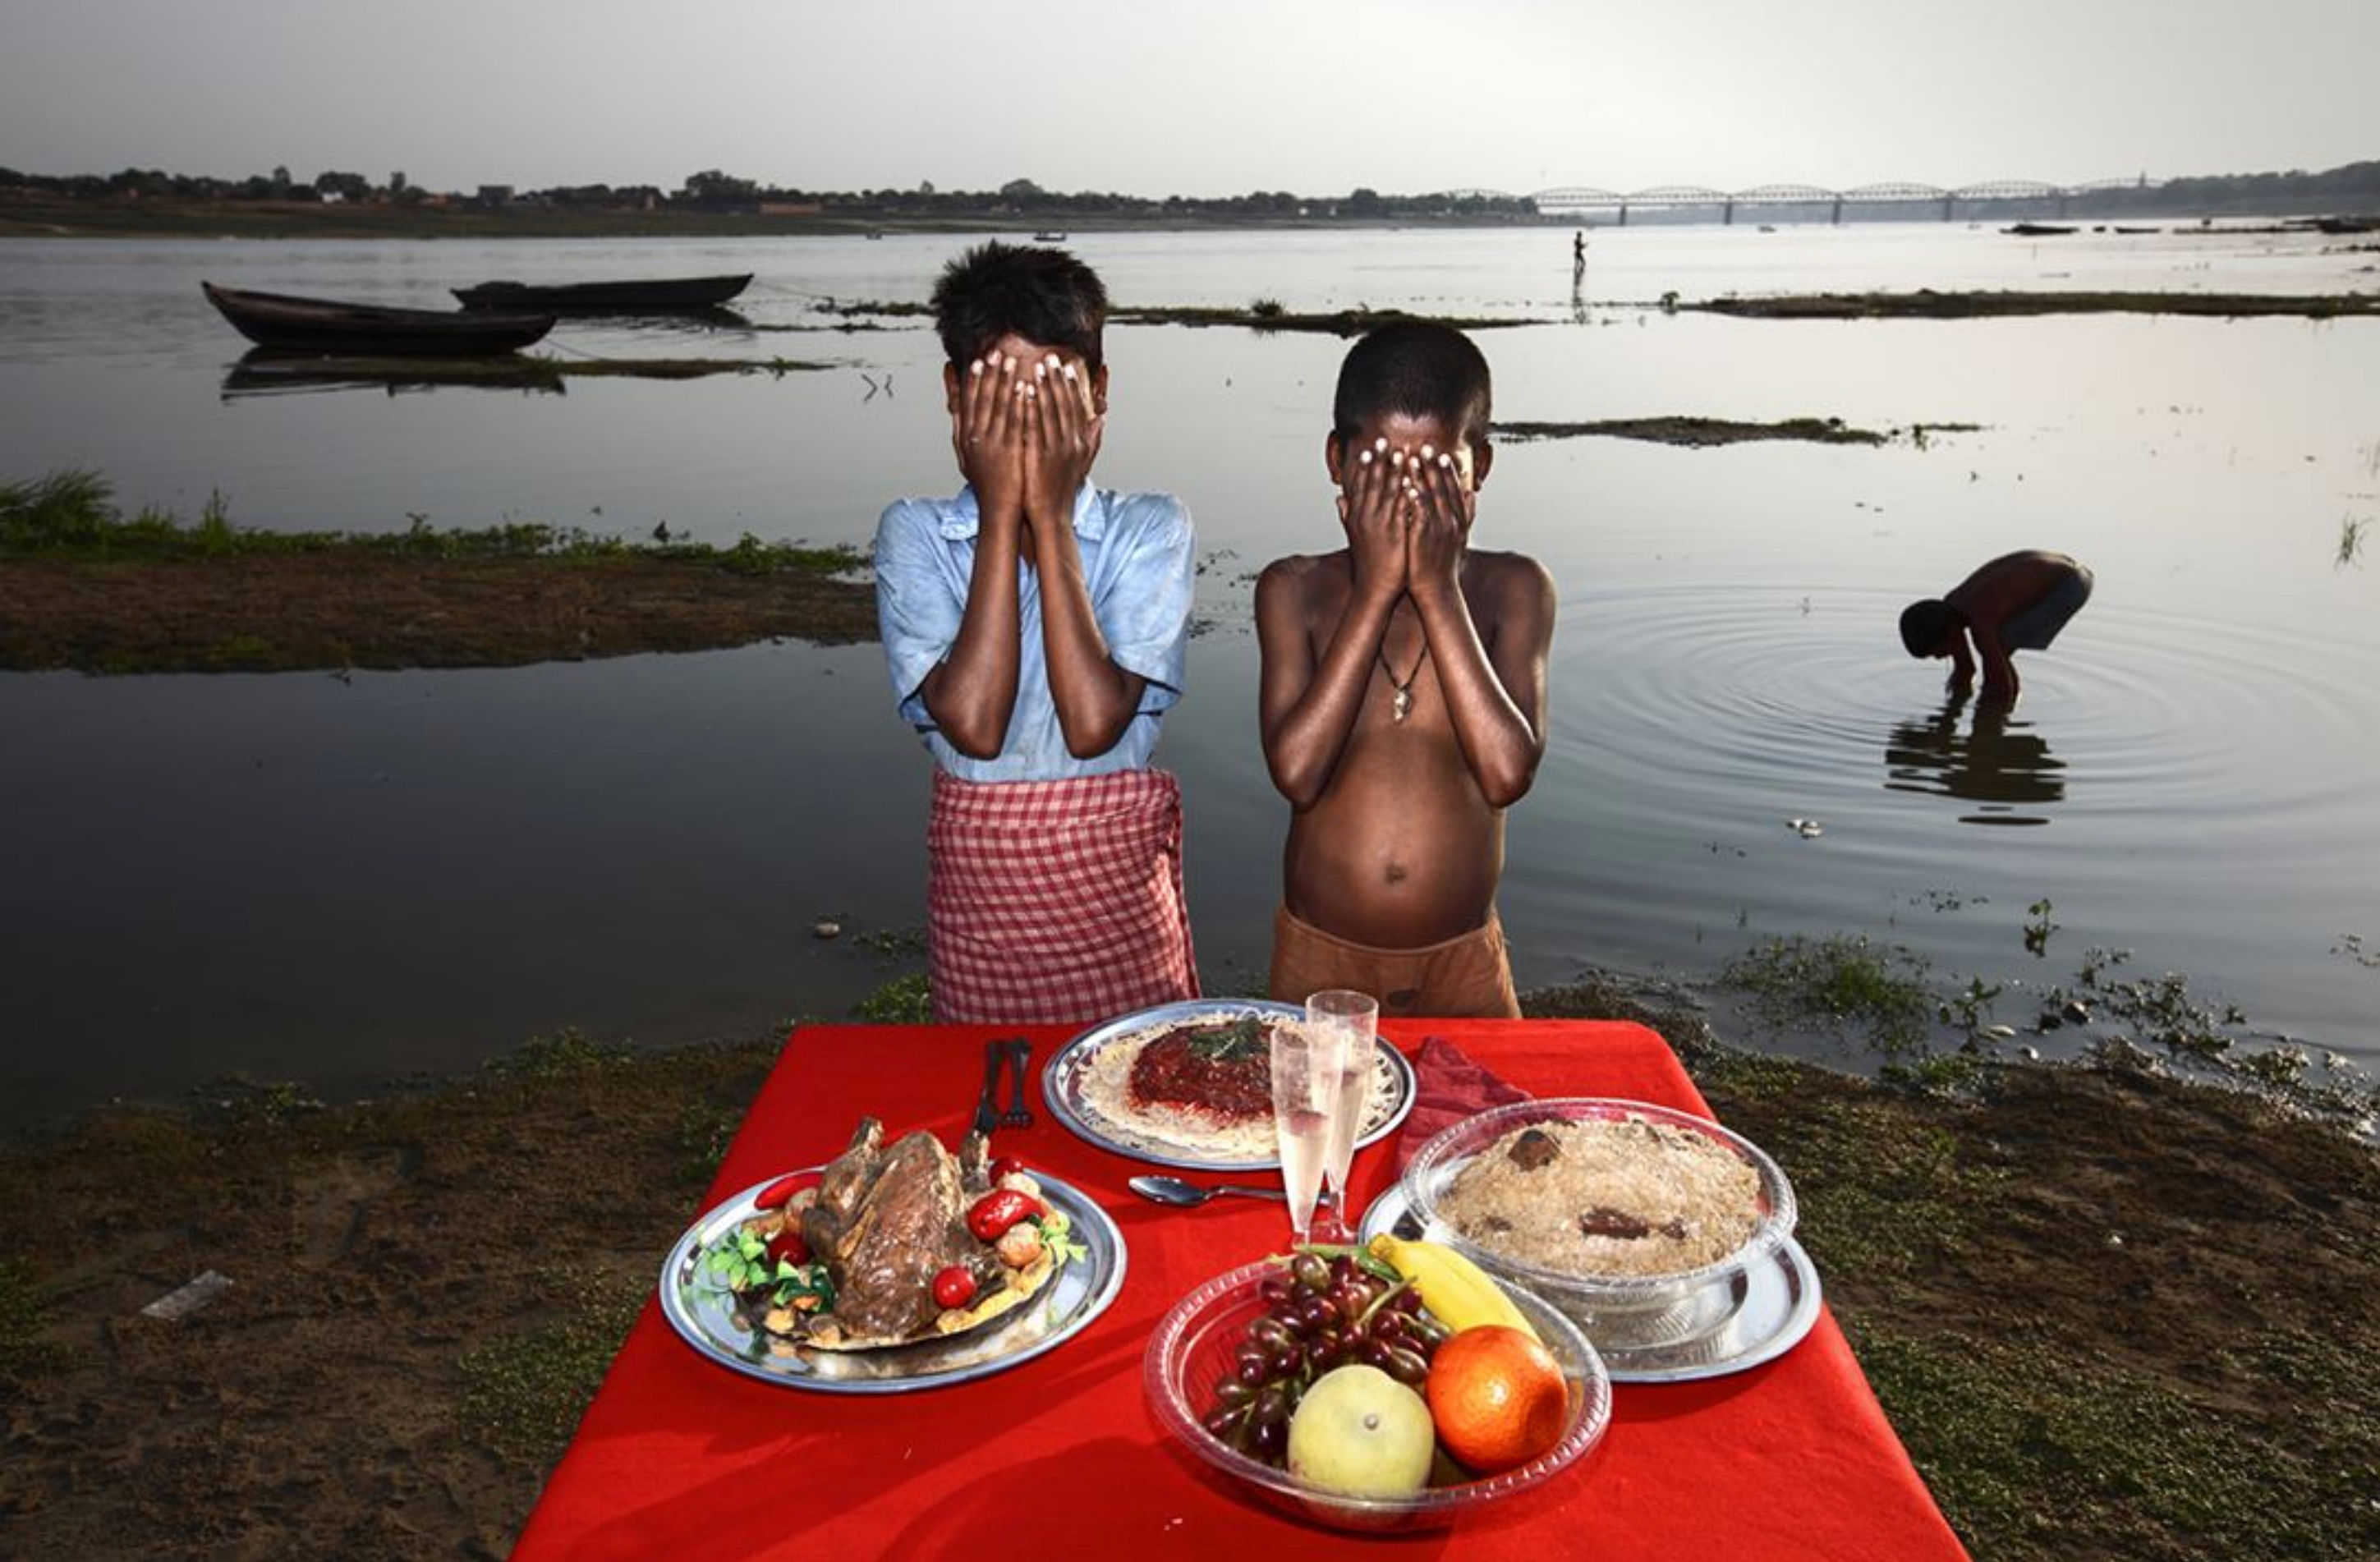 Another photo from the 'Dreaming Food' series | worldpressphoto/ Instagram